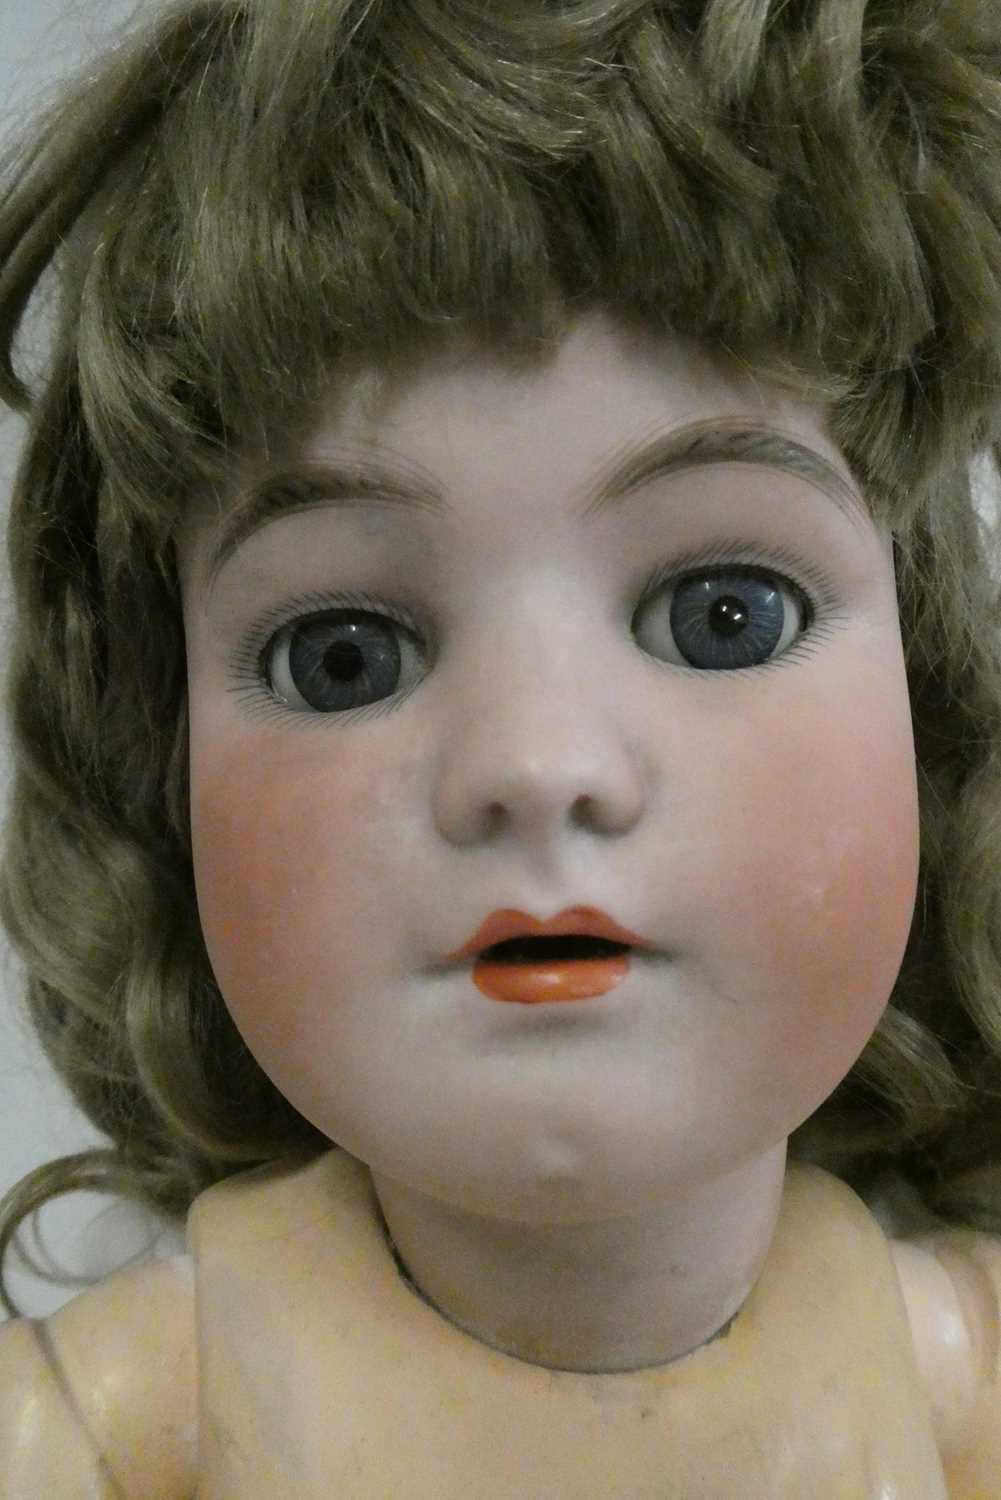 A Heinrich Handwerck Simon & Halbig bisque socket head doll, with blue glass sleeping eyes, open - Image 2 of 3